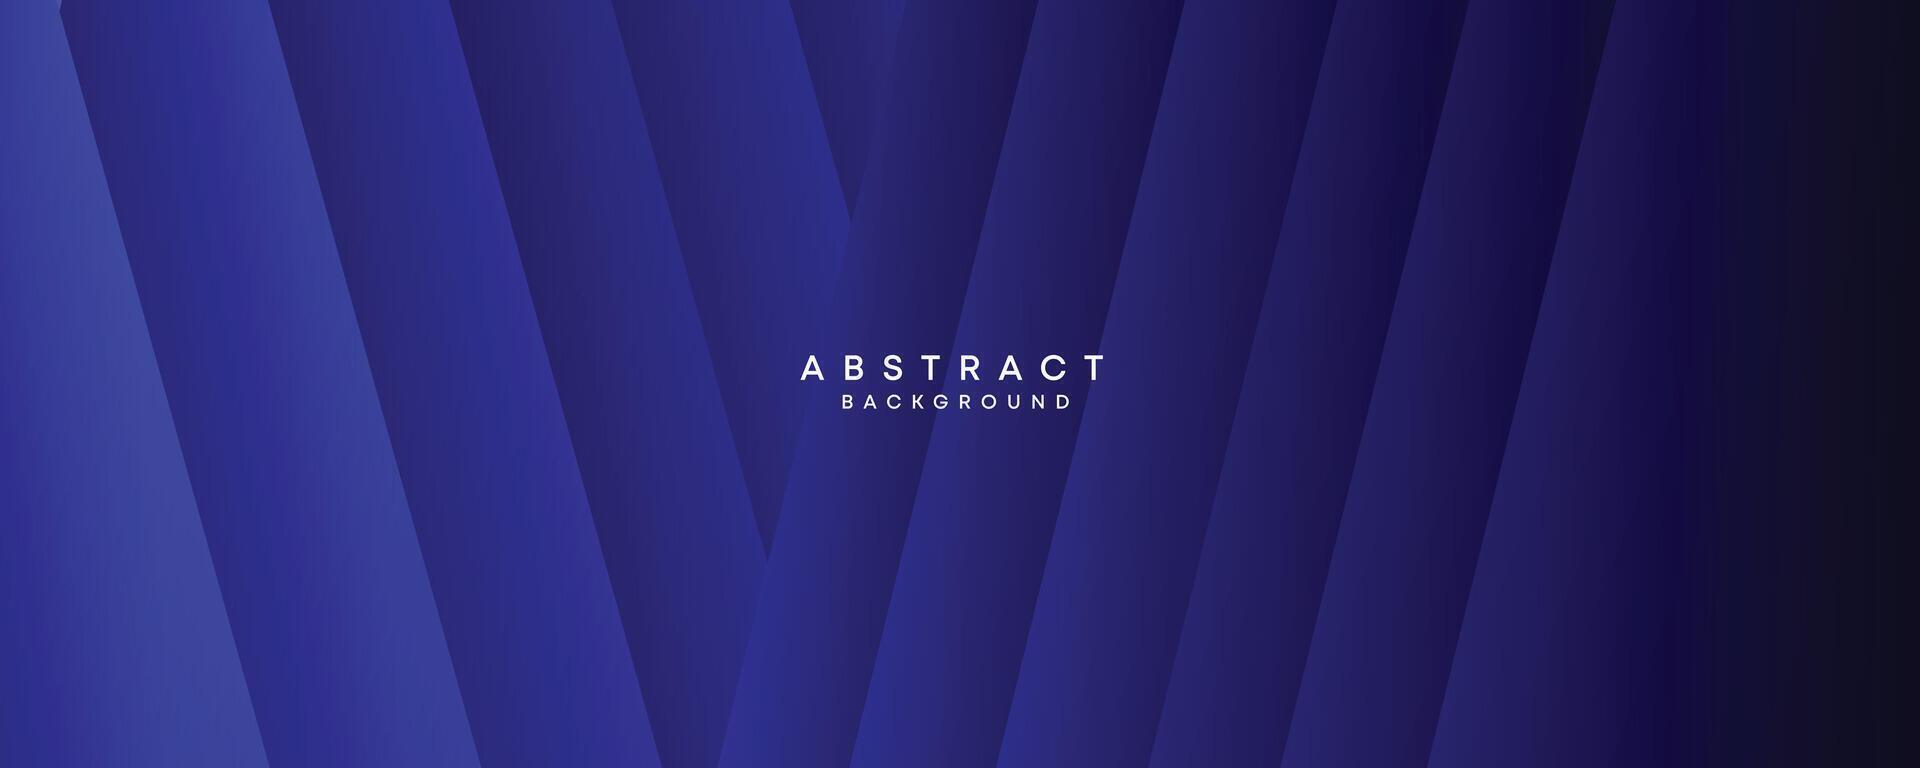 diagonal geometric overlay layer on an abstract dark blue banner design background. Contemporary graphic elements in the shape of squares. Makes a good cover, header, banner, brochure, or website vector